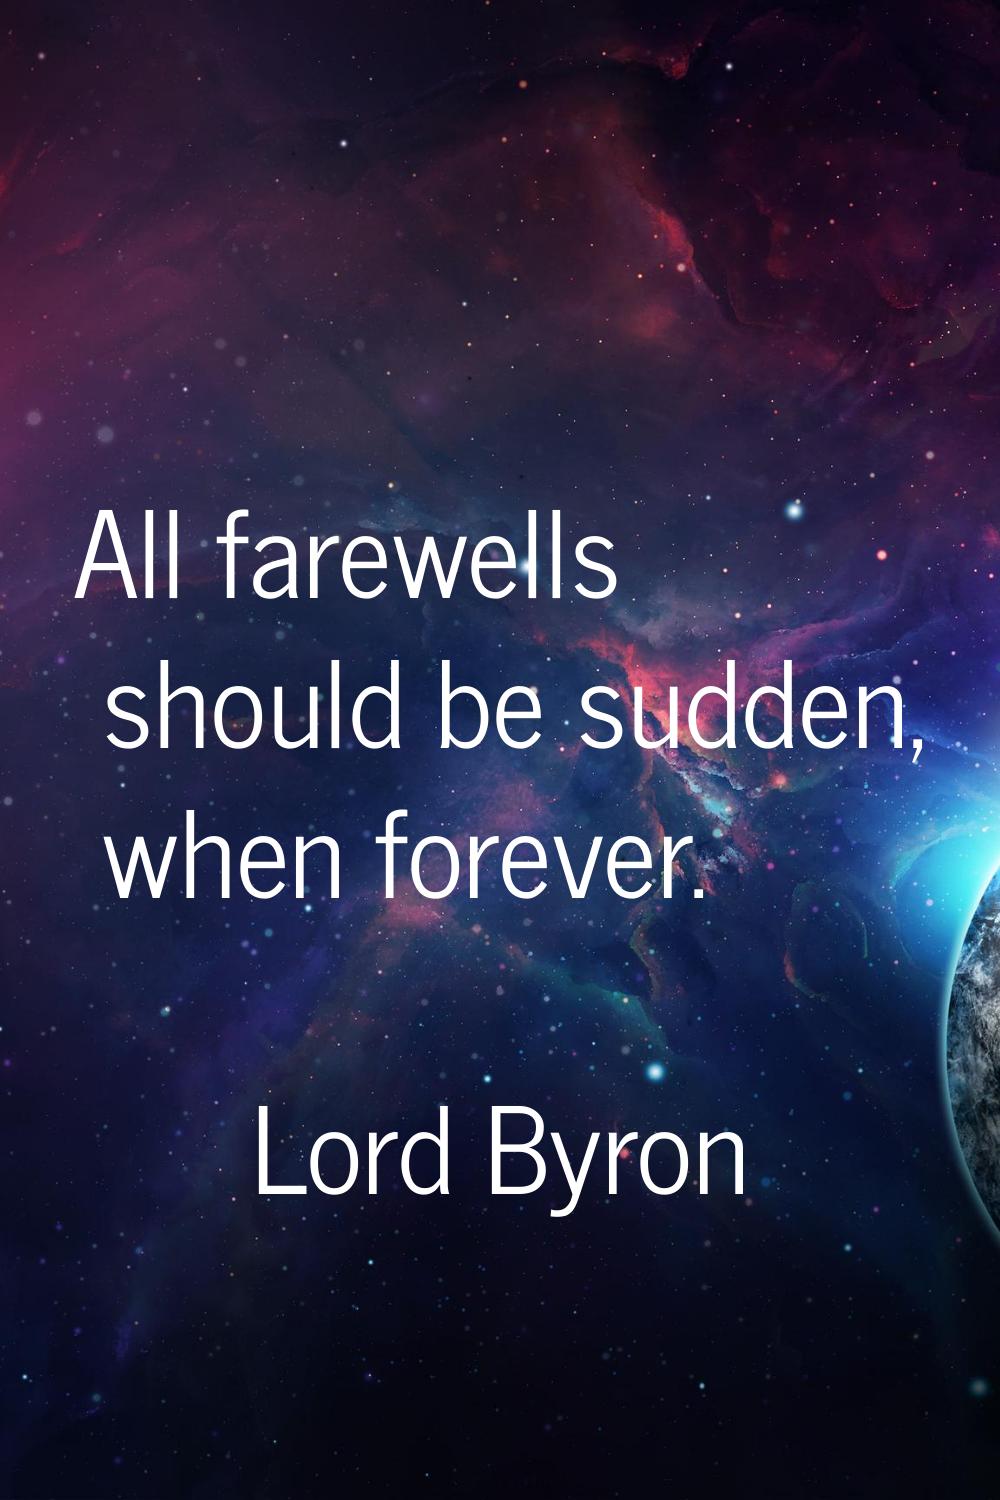 All farewells should be sudden, when forever.